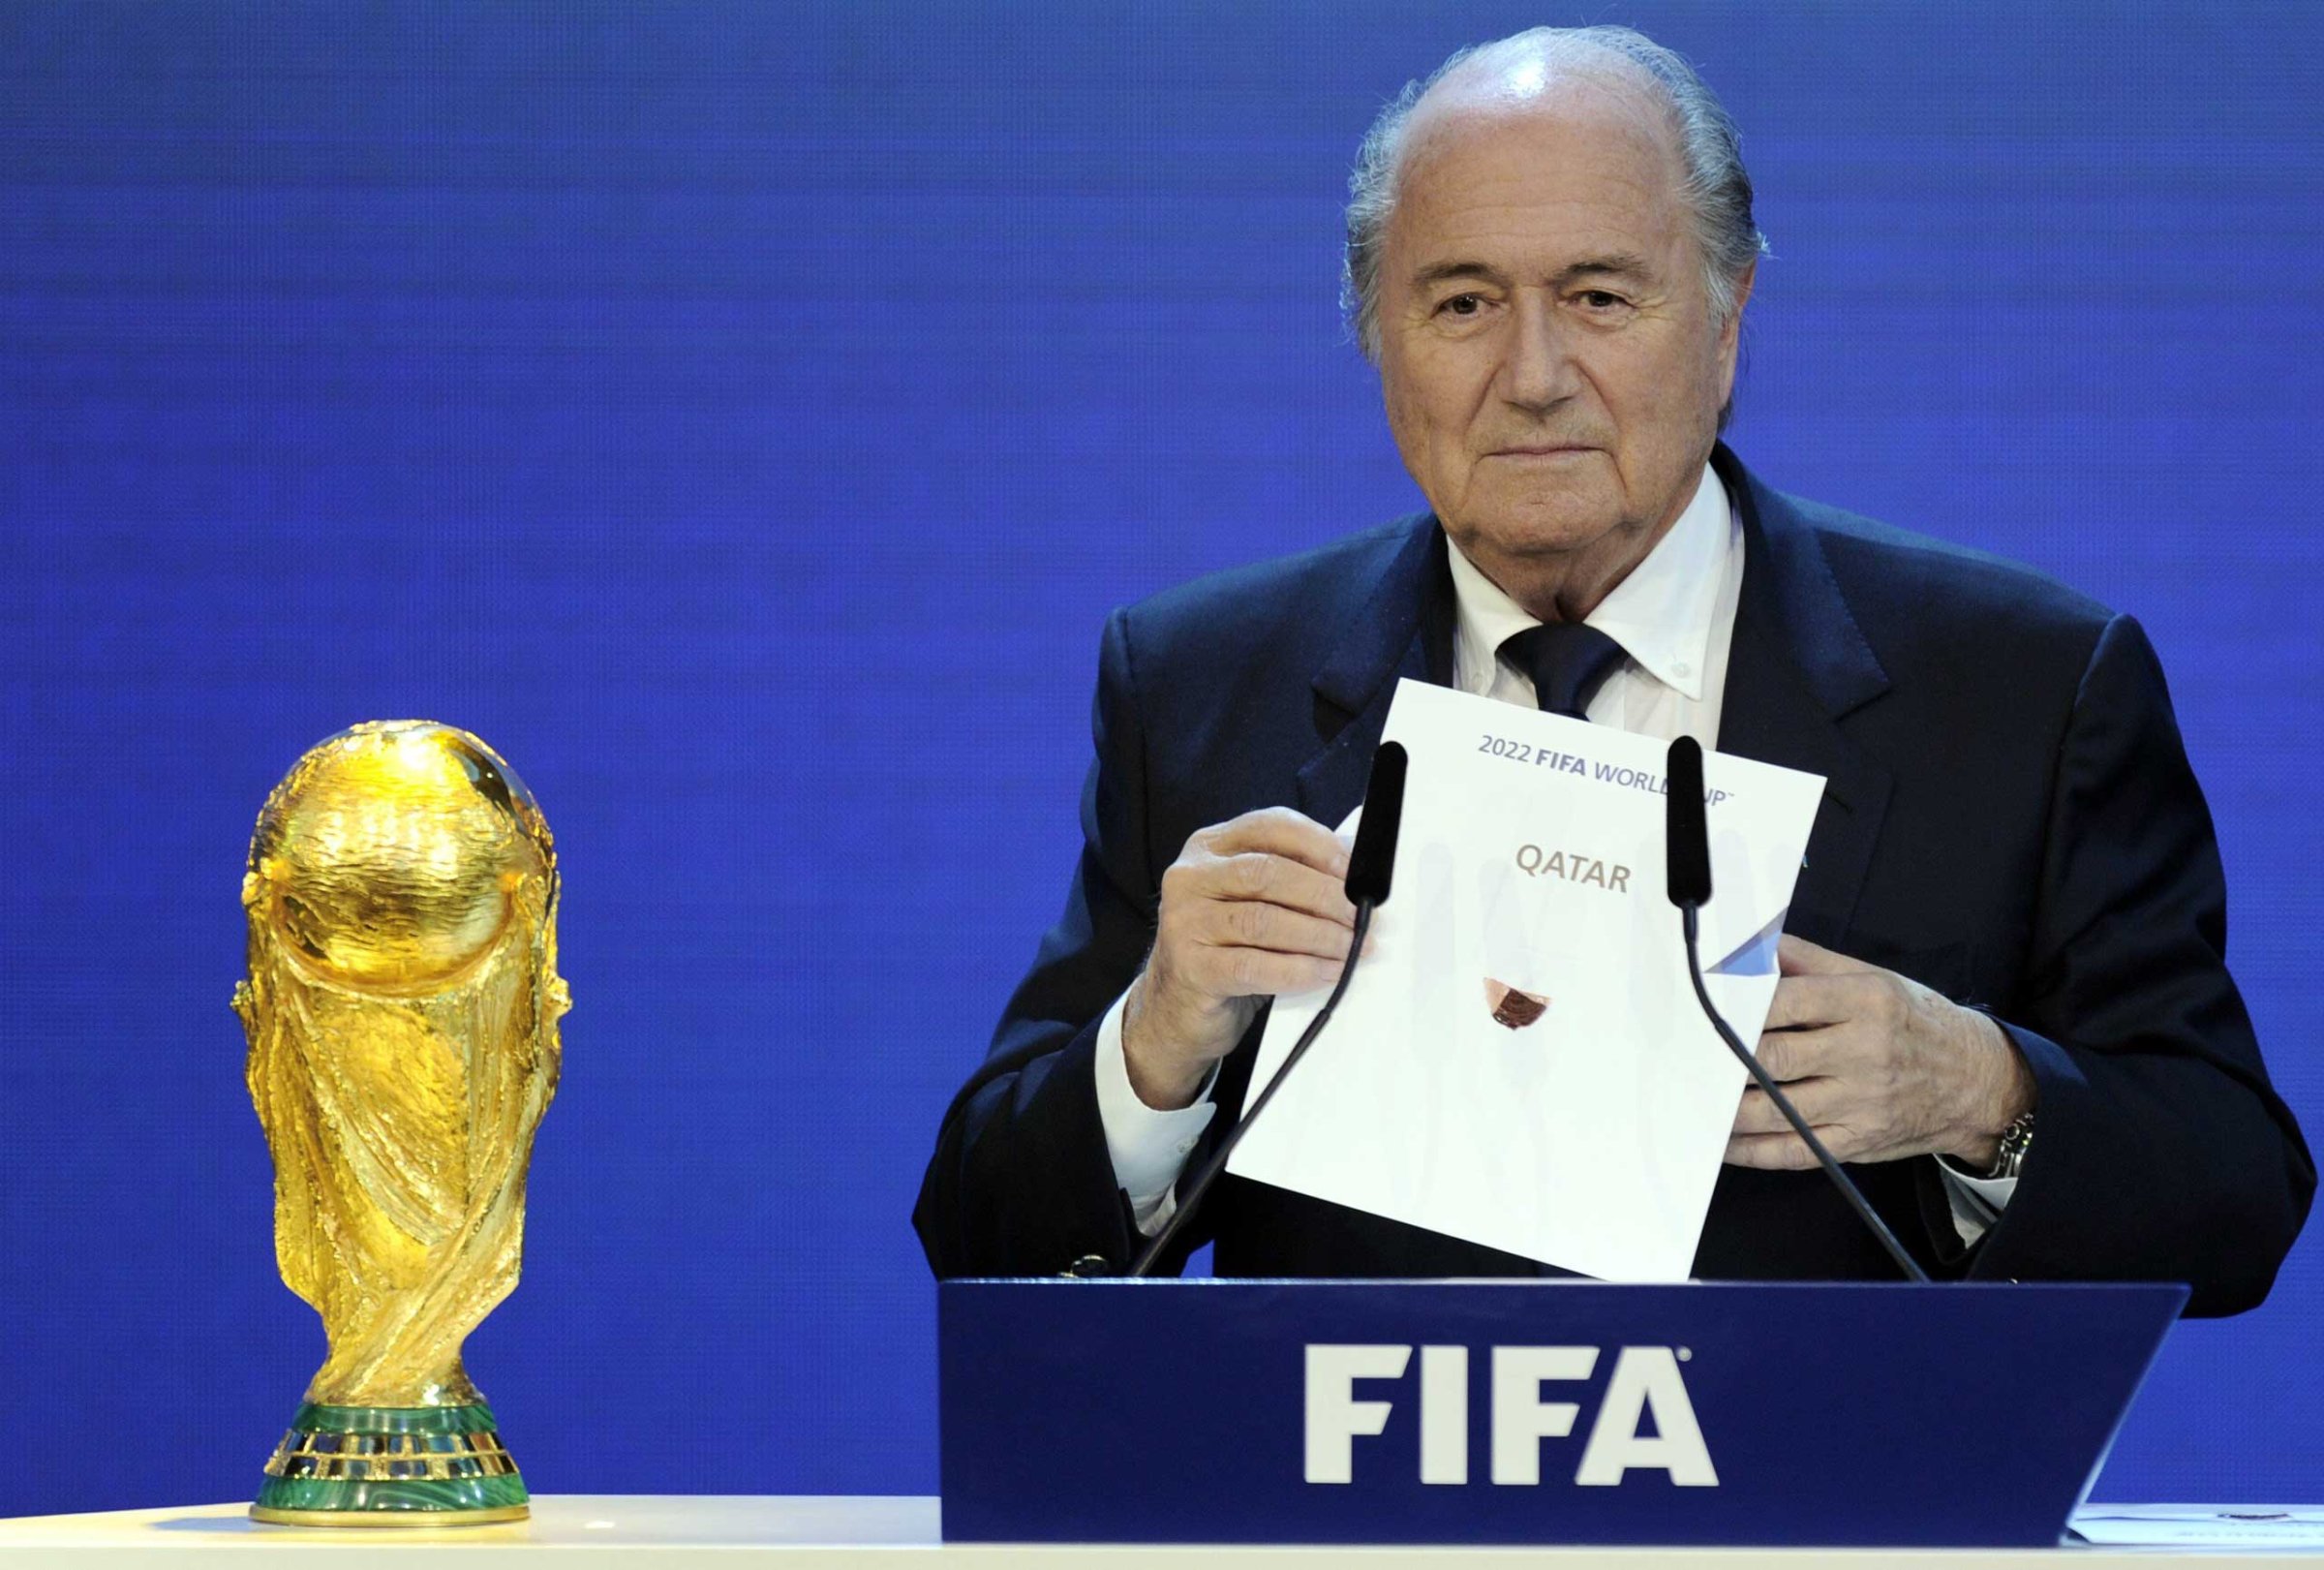 FIFA President Sepp Blatter holding up the name of Qatar during the official announcement of the 2022 World Cup host country at the FIFA headquarters in Zurich, Dec. 2, 2010.